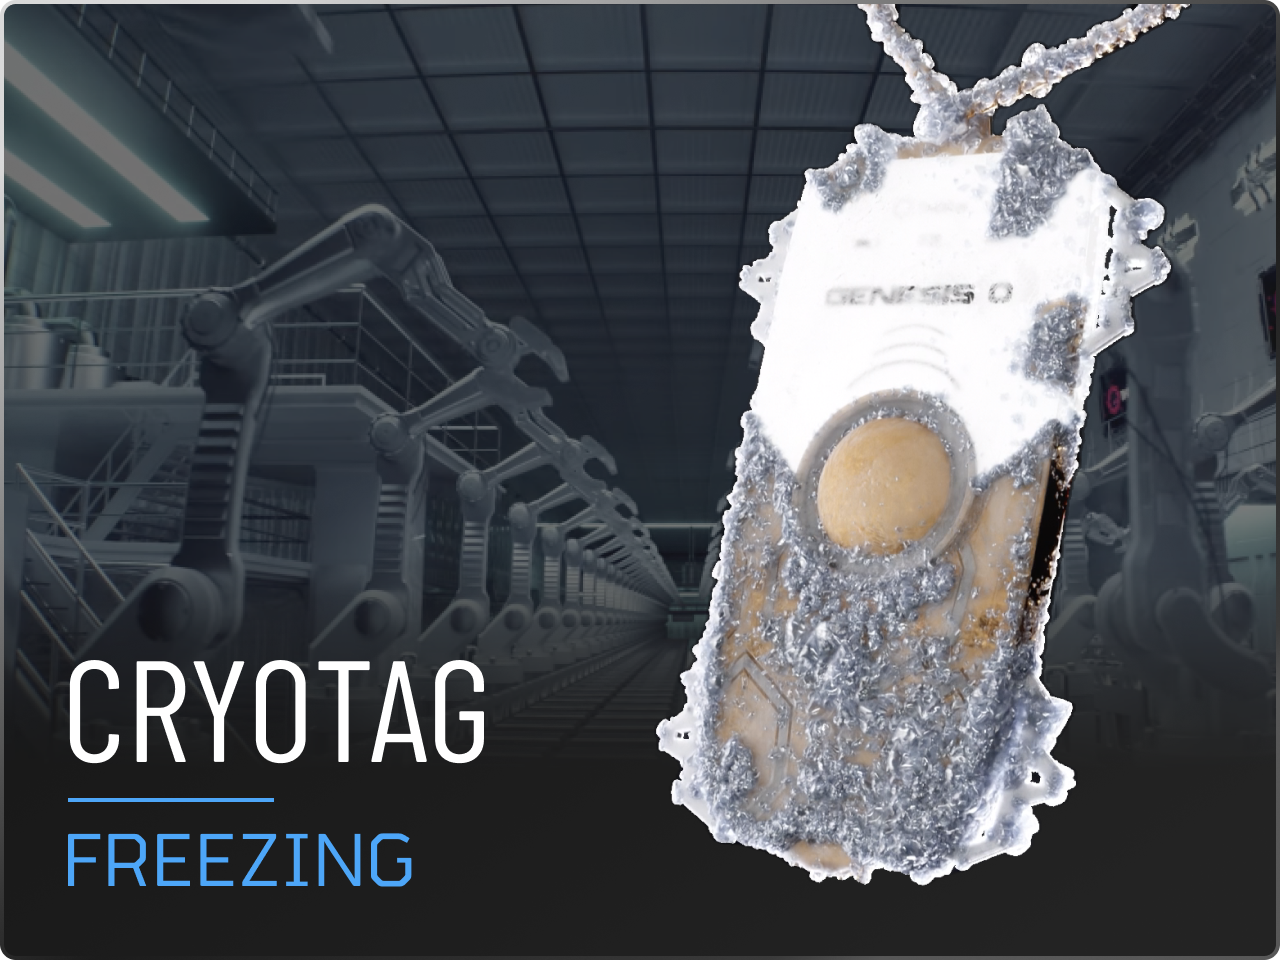 Cryotag Freezing Release